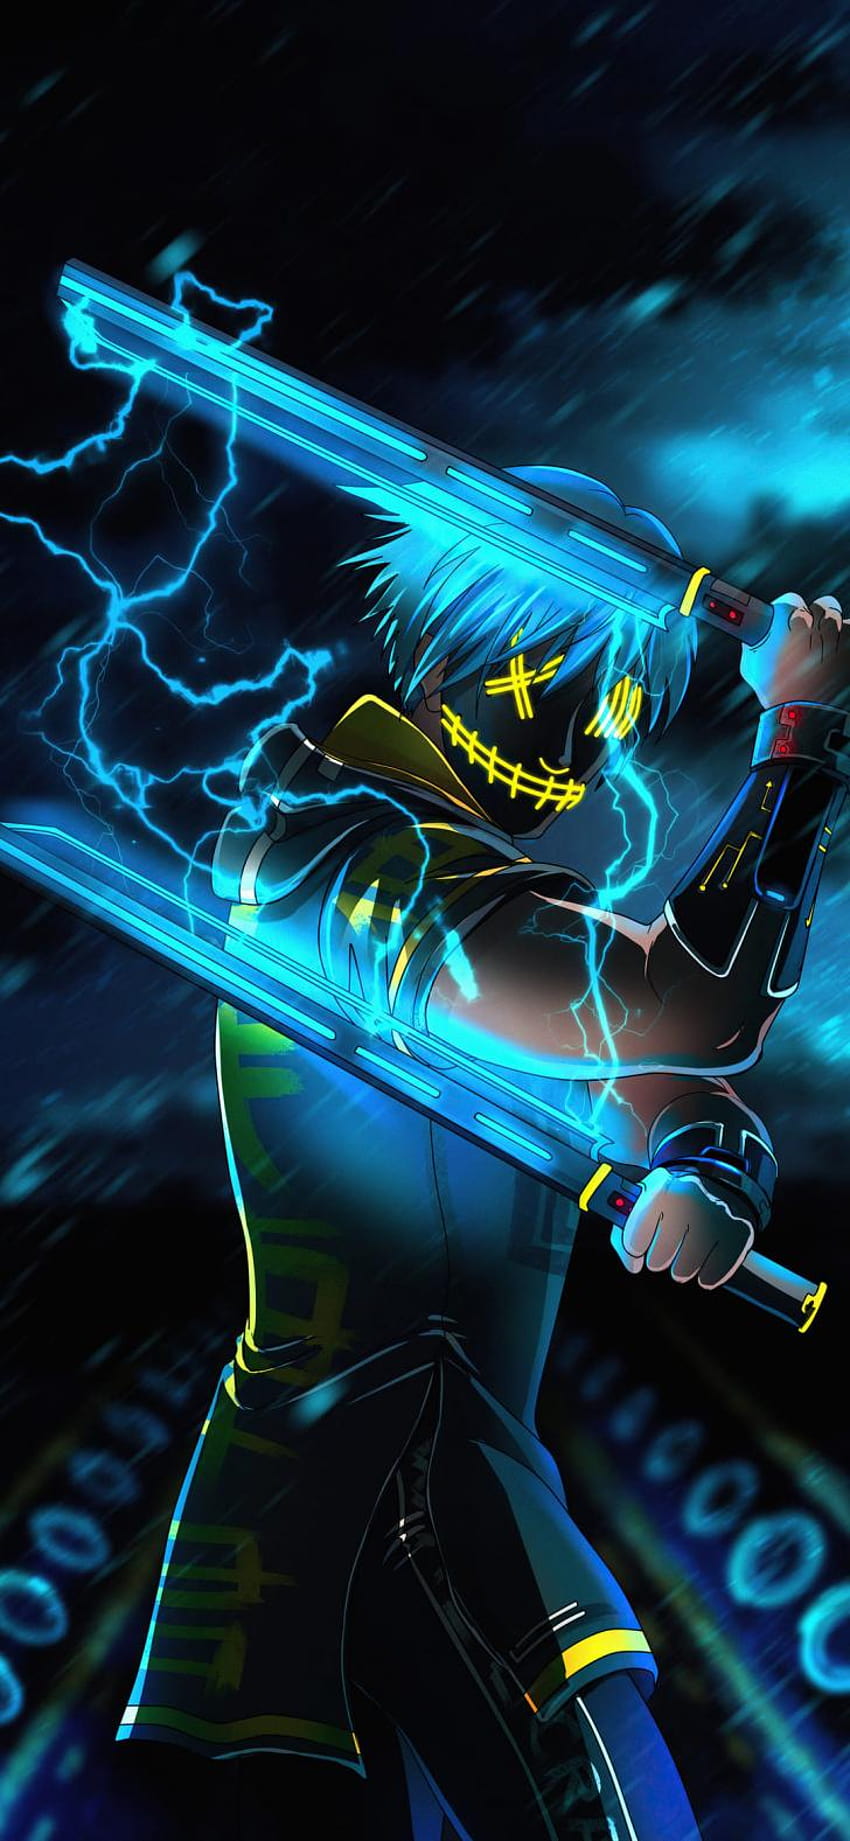 Want epic anime wallpaper photo by Mohabraaft | Fiverr